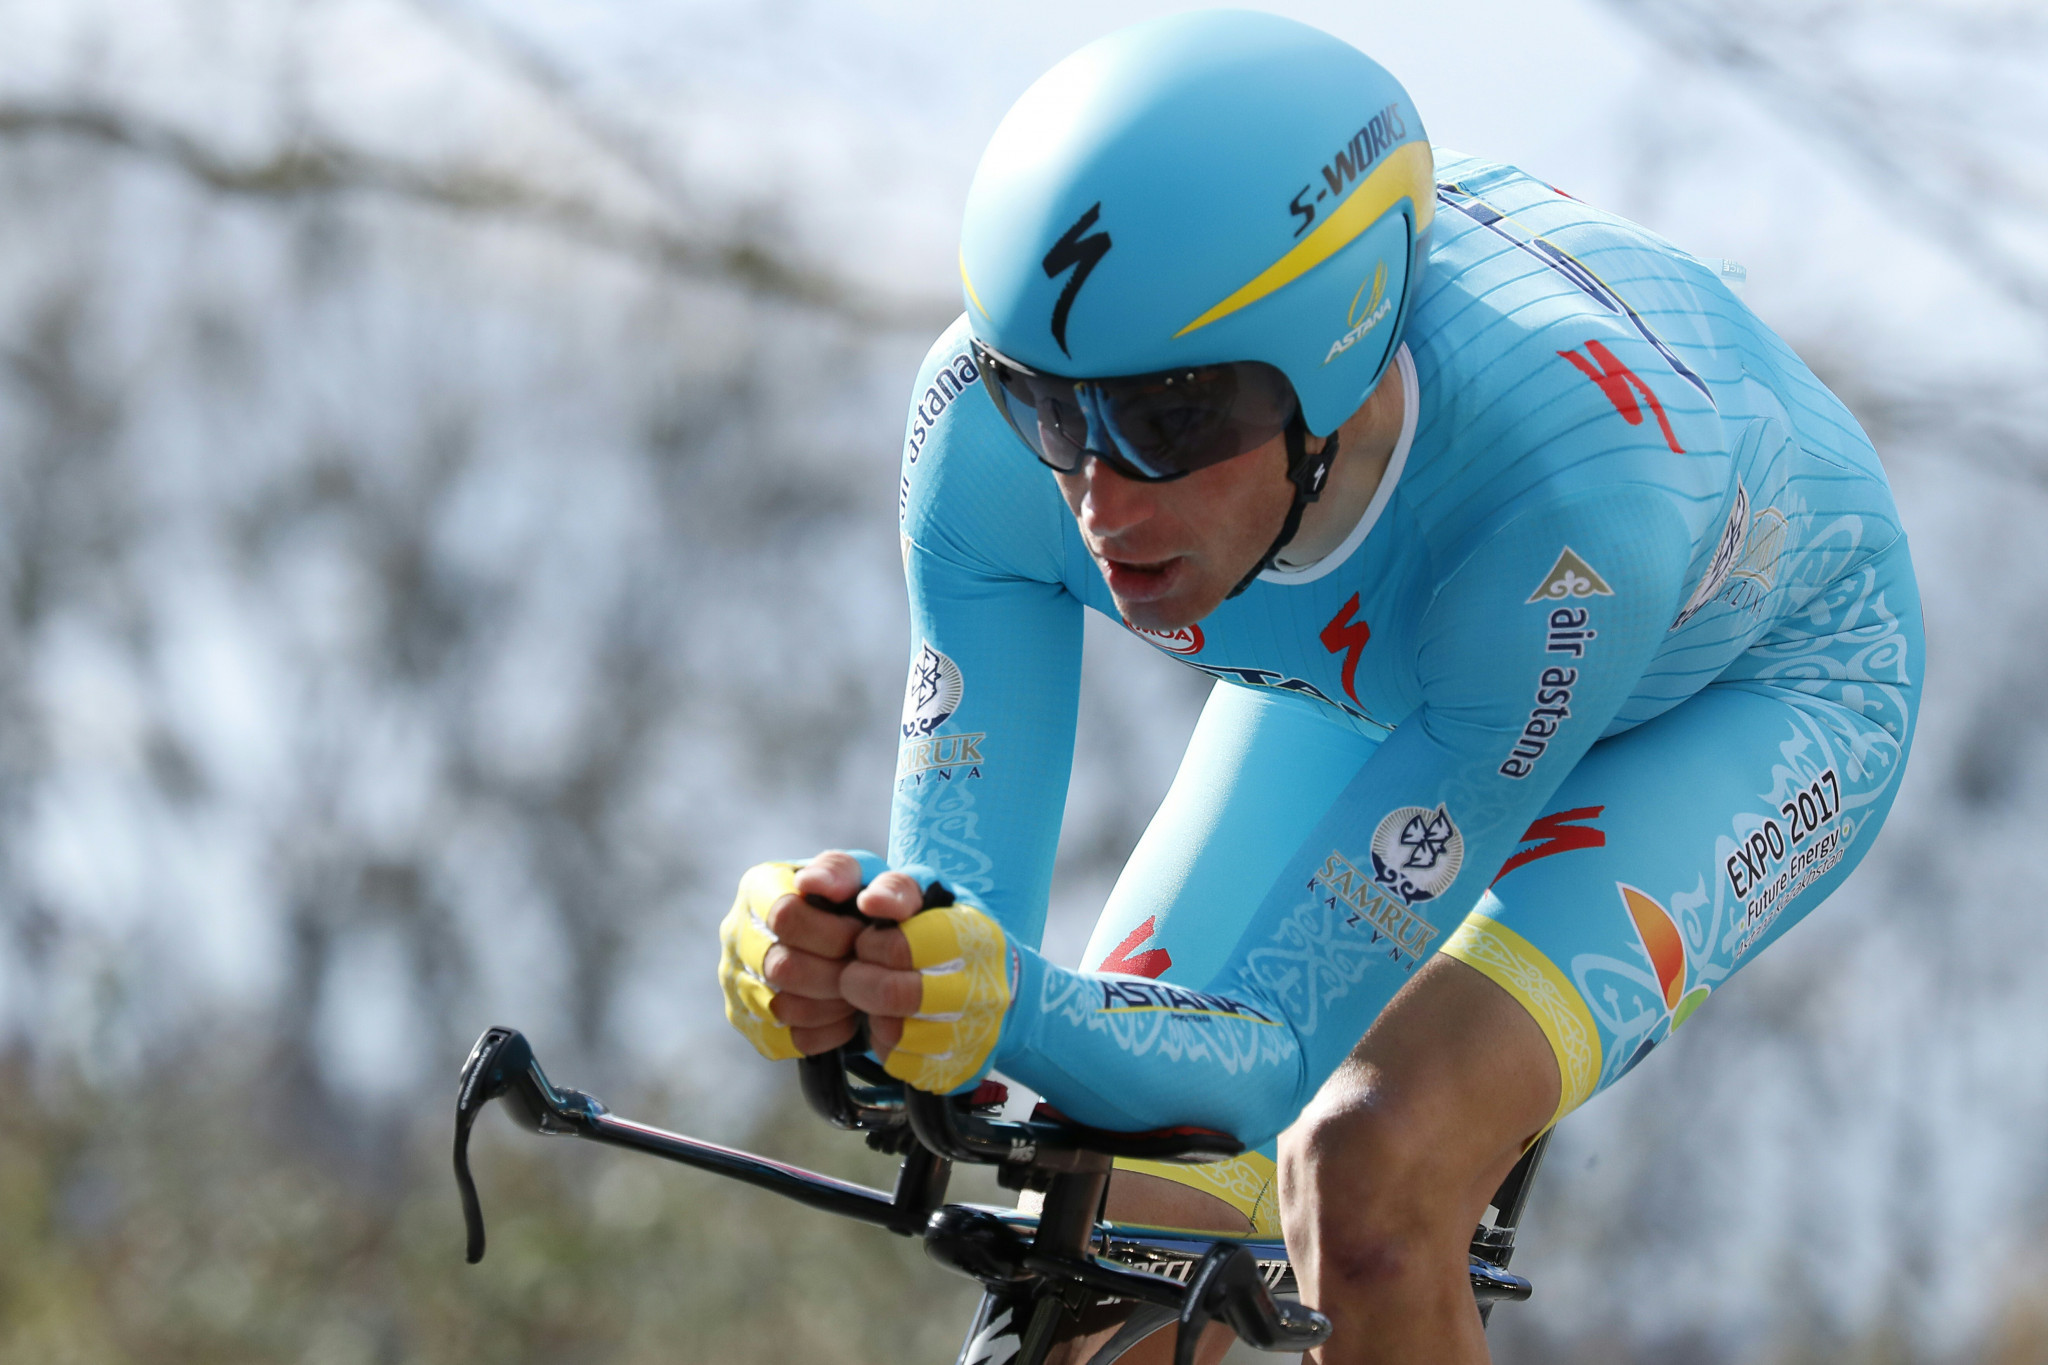 Astana shocked after former rider claims he faked injury to receive TUEs